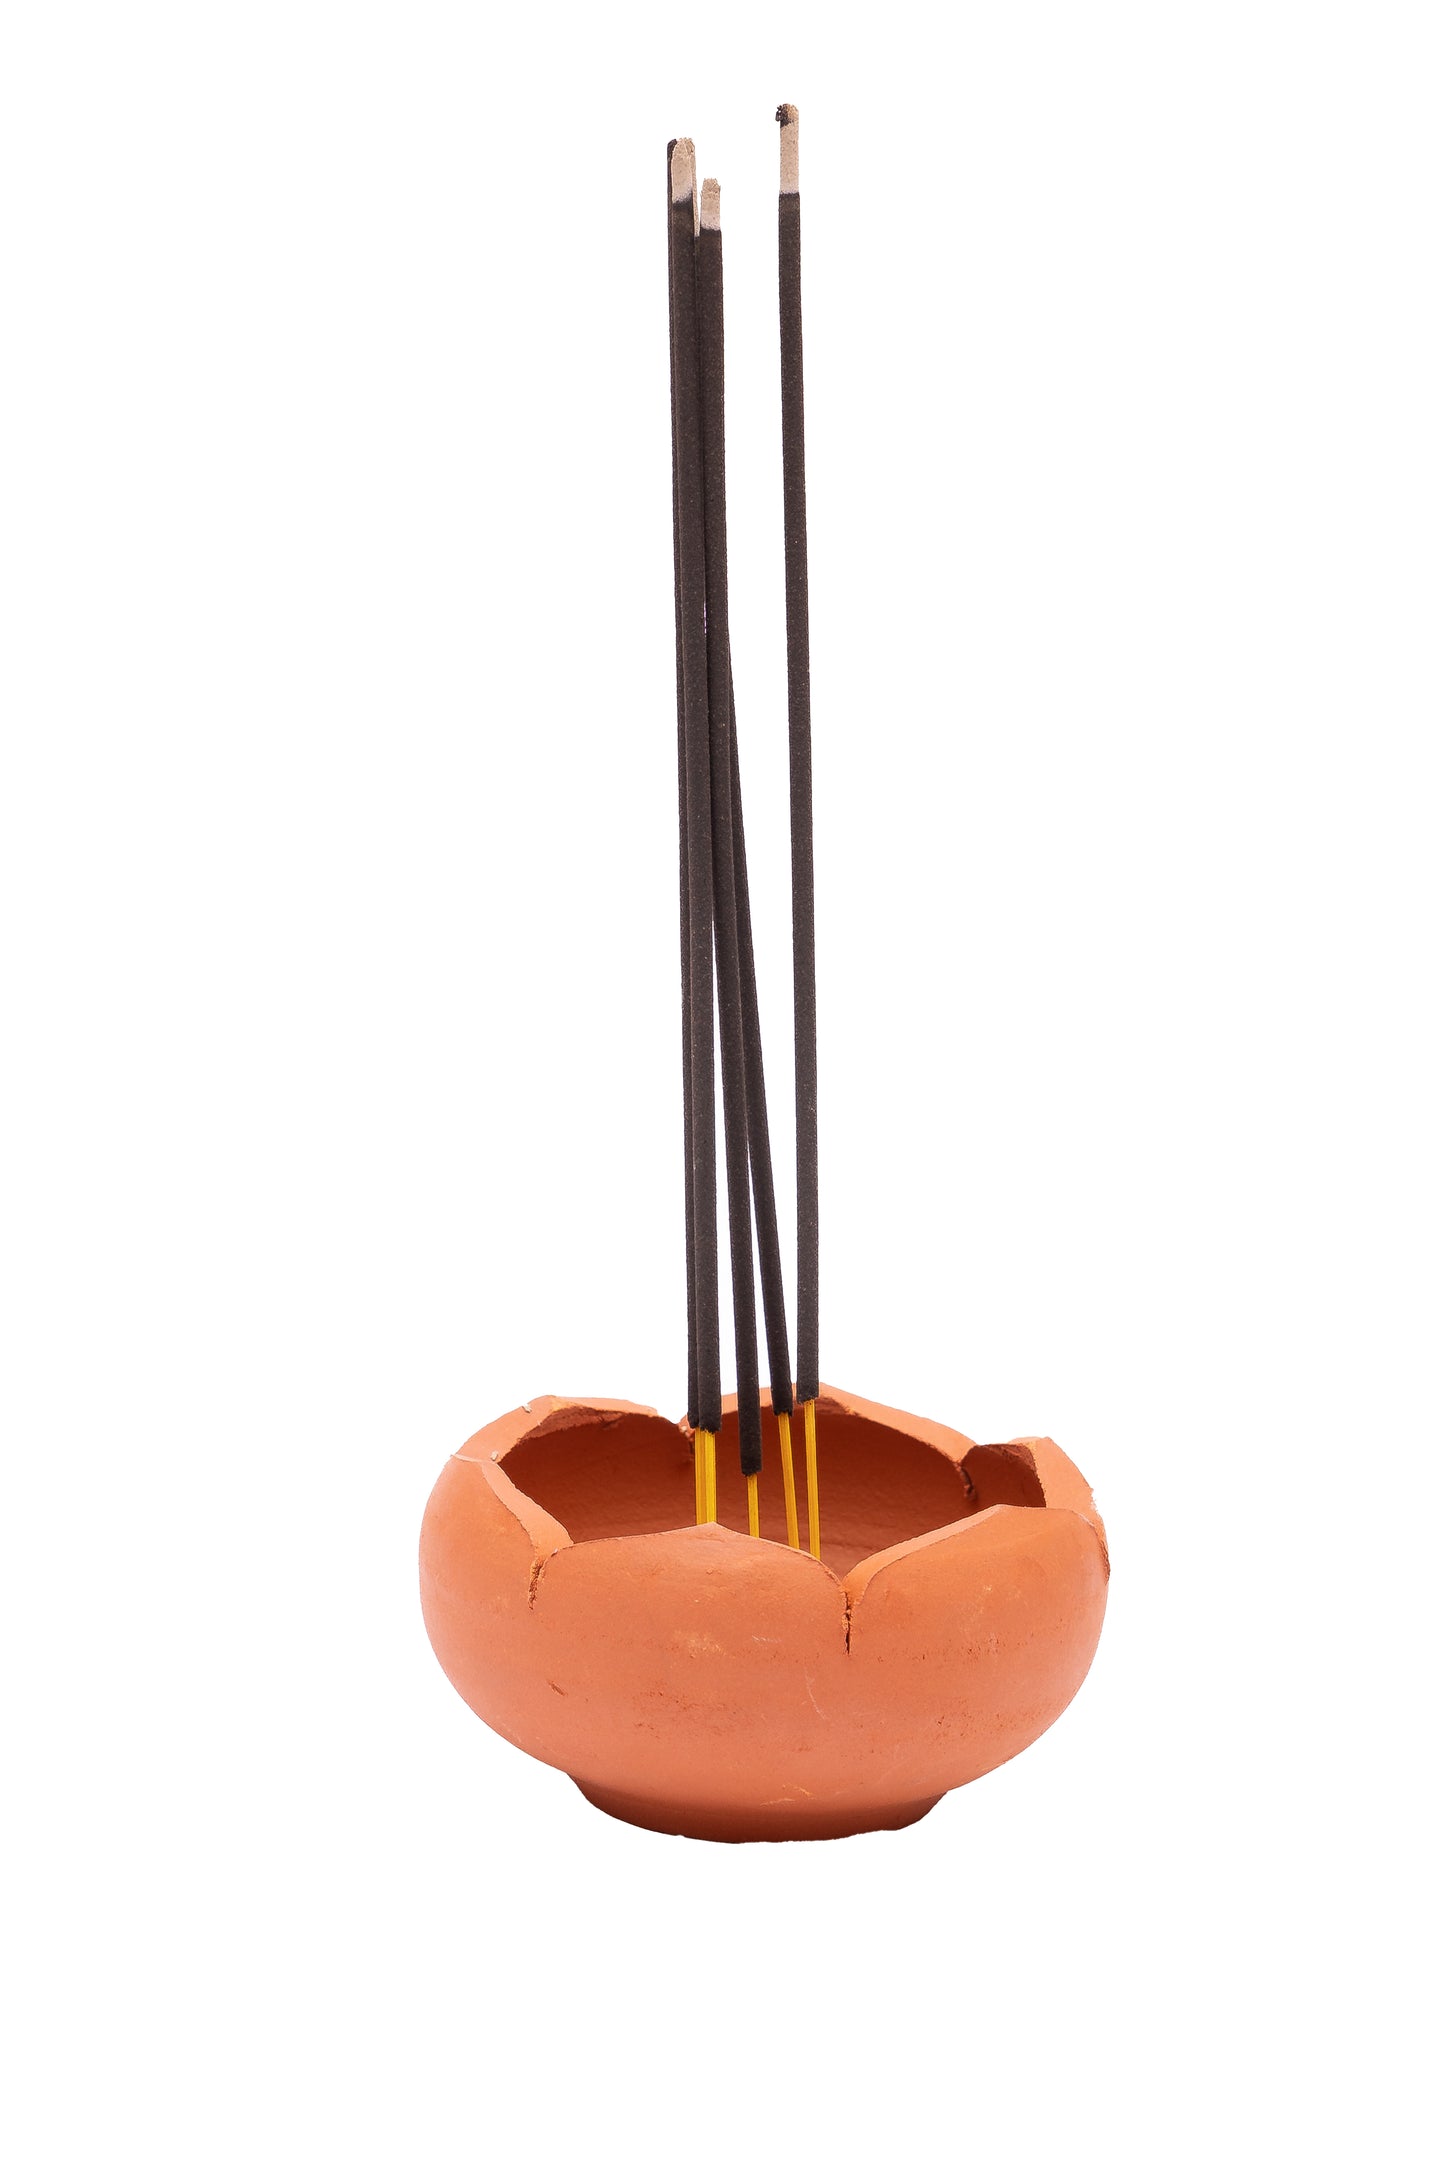 Terracotta agarbatti Stand / Vathi Stand, Incense Stick Holder (Pack of 3)